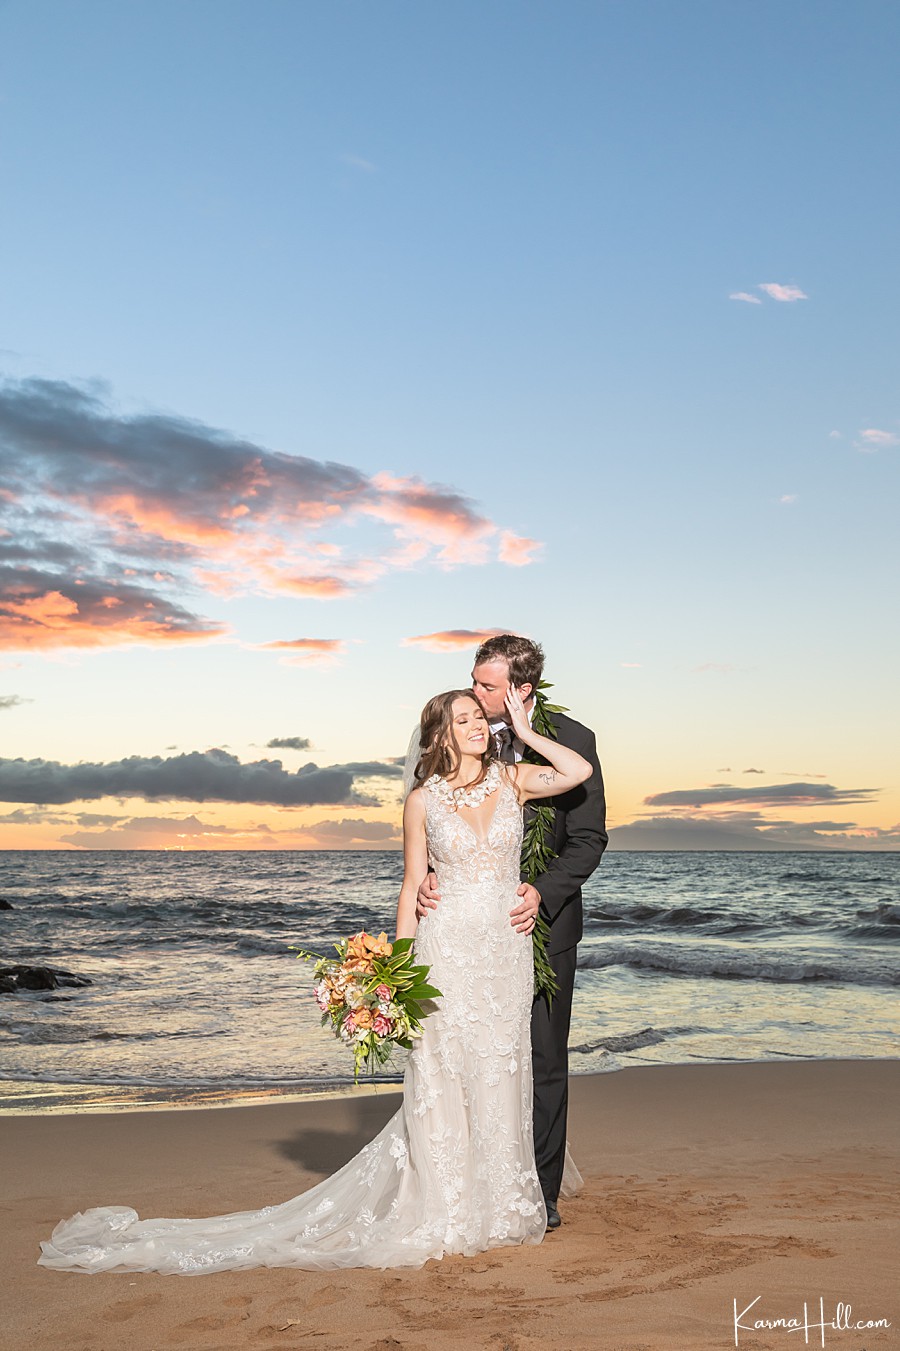 Hawaii marriage license guide
